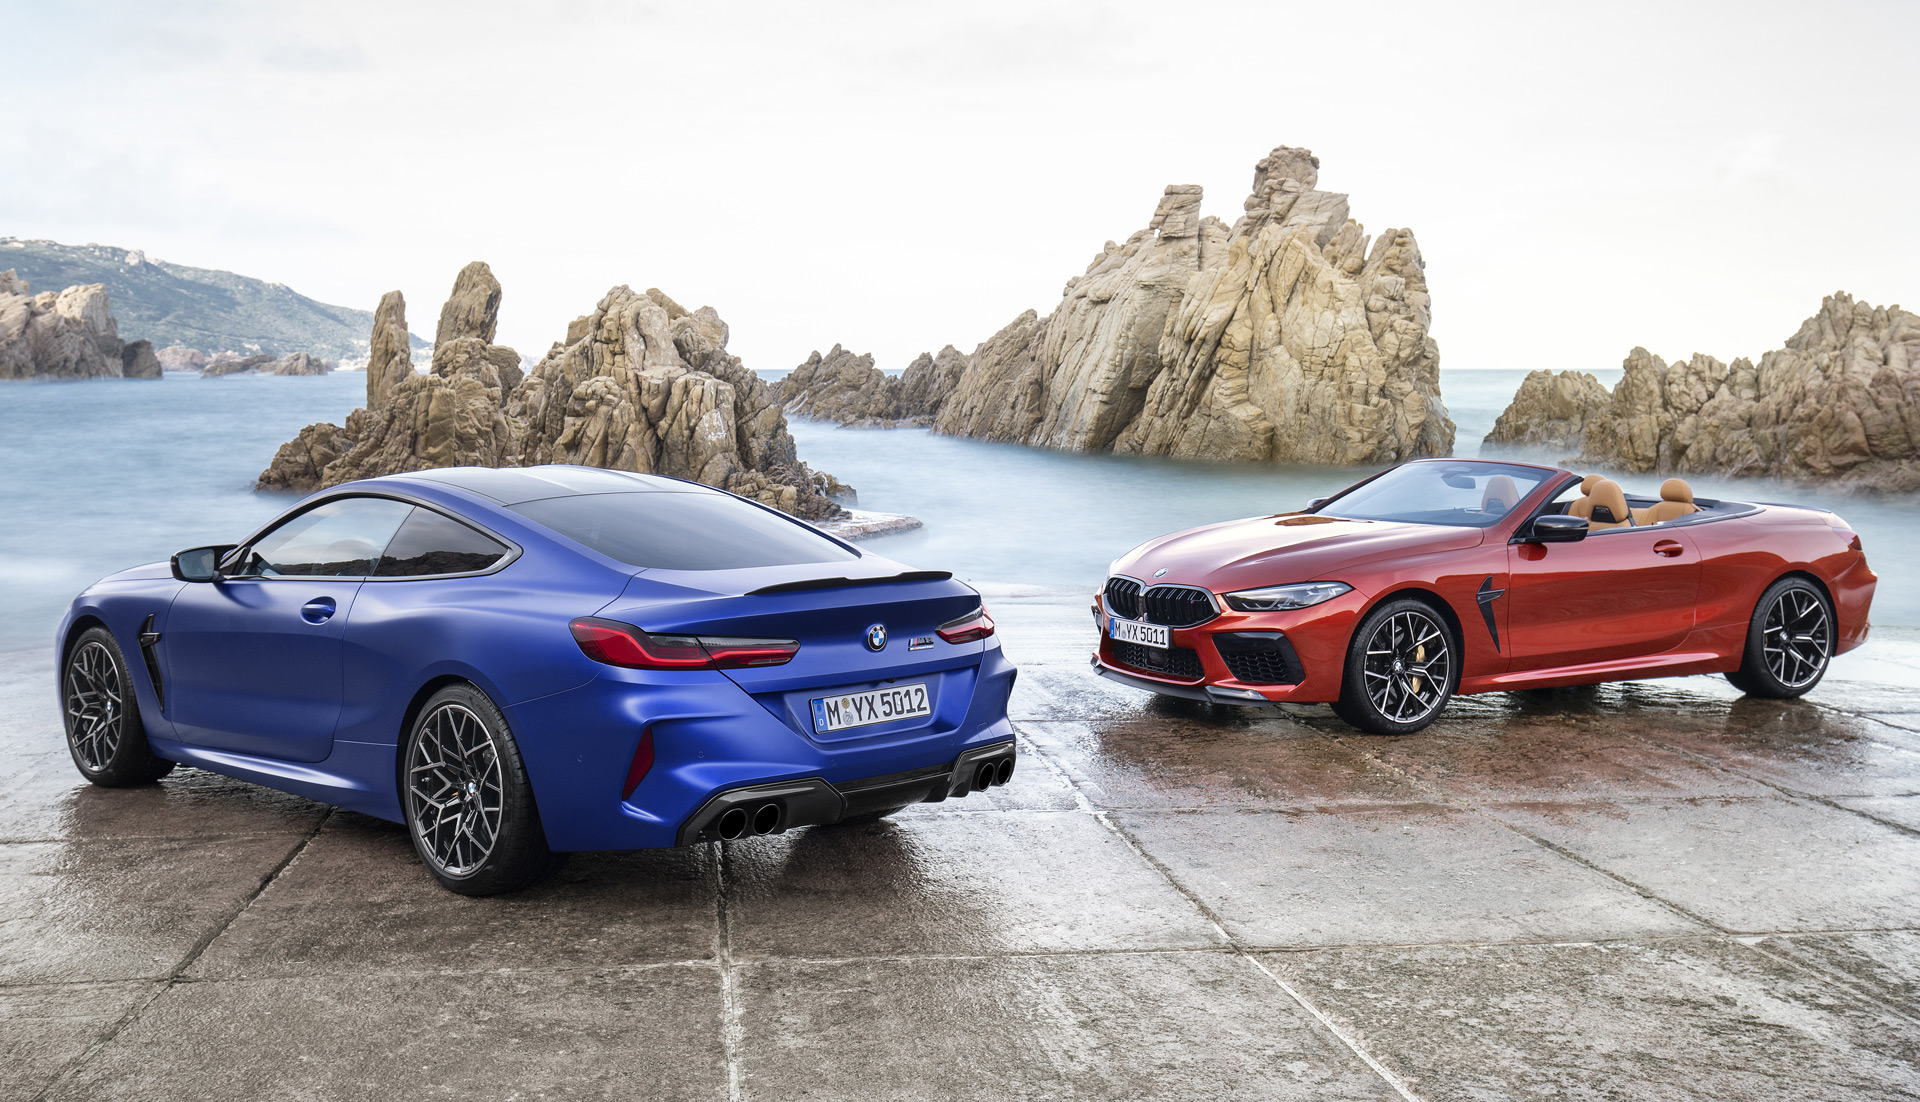 2020 BMW M8 and M8 Convertible arrive with over 600 horsepower